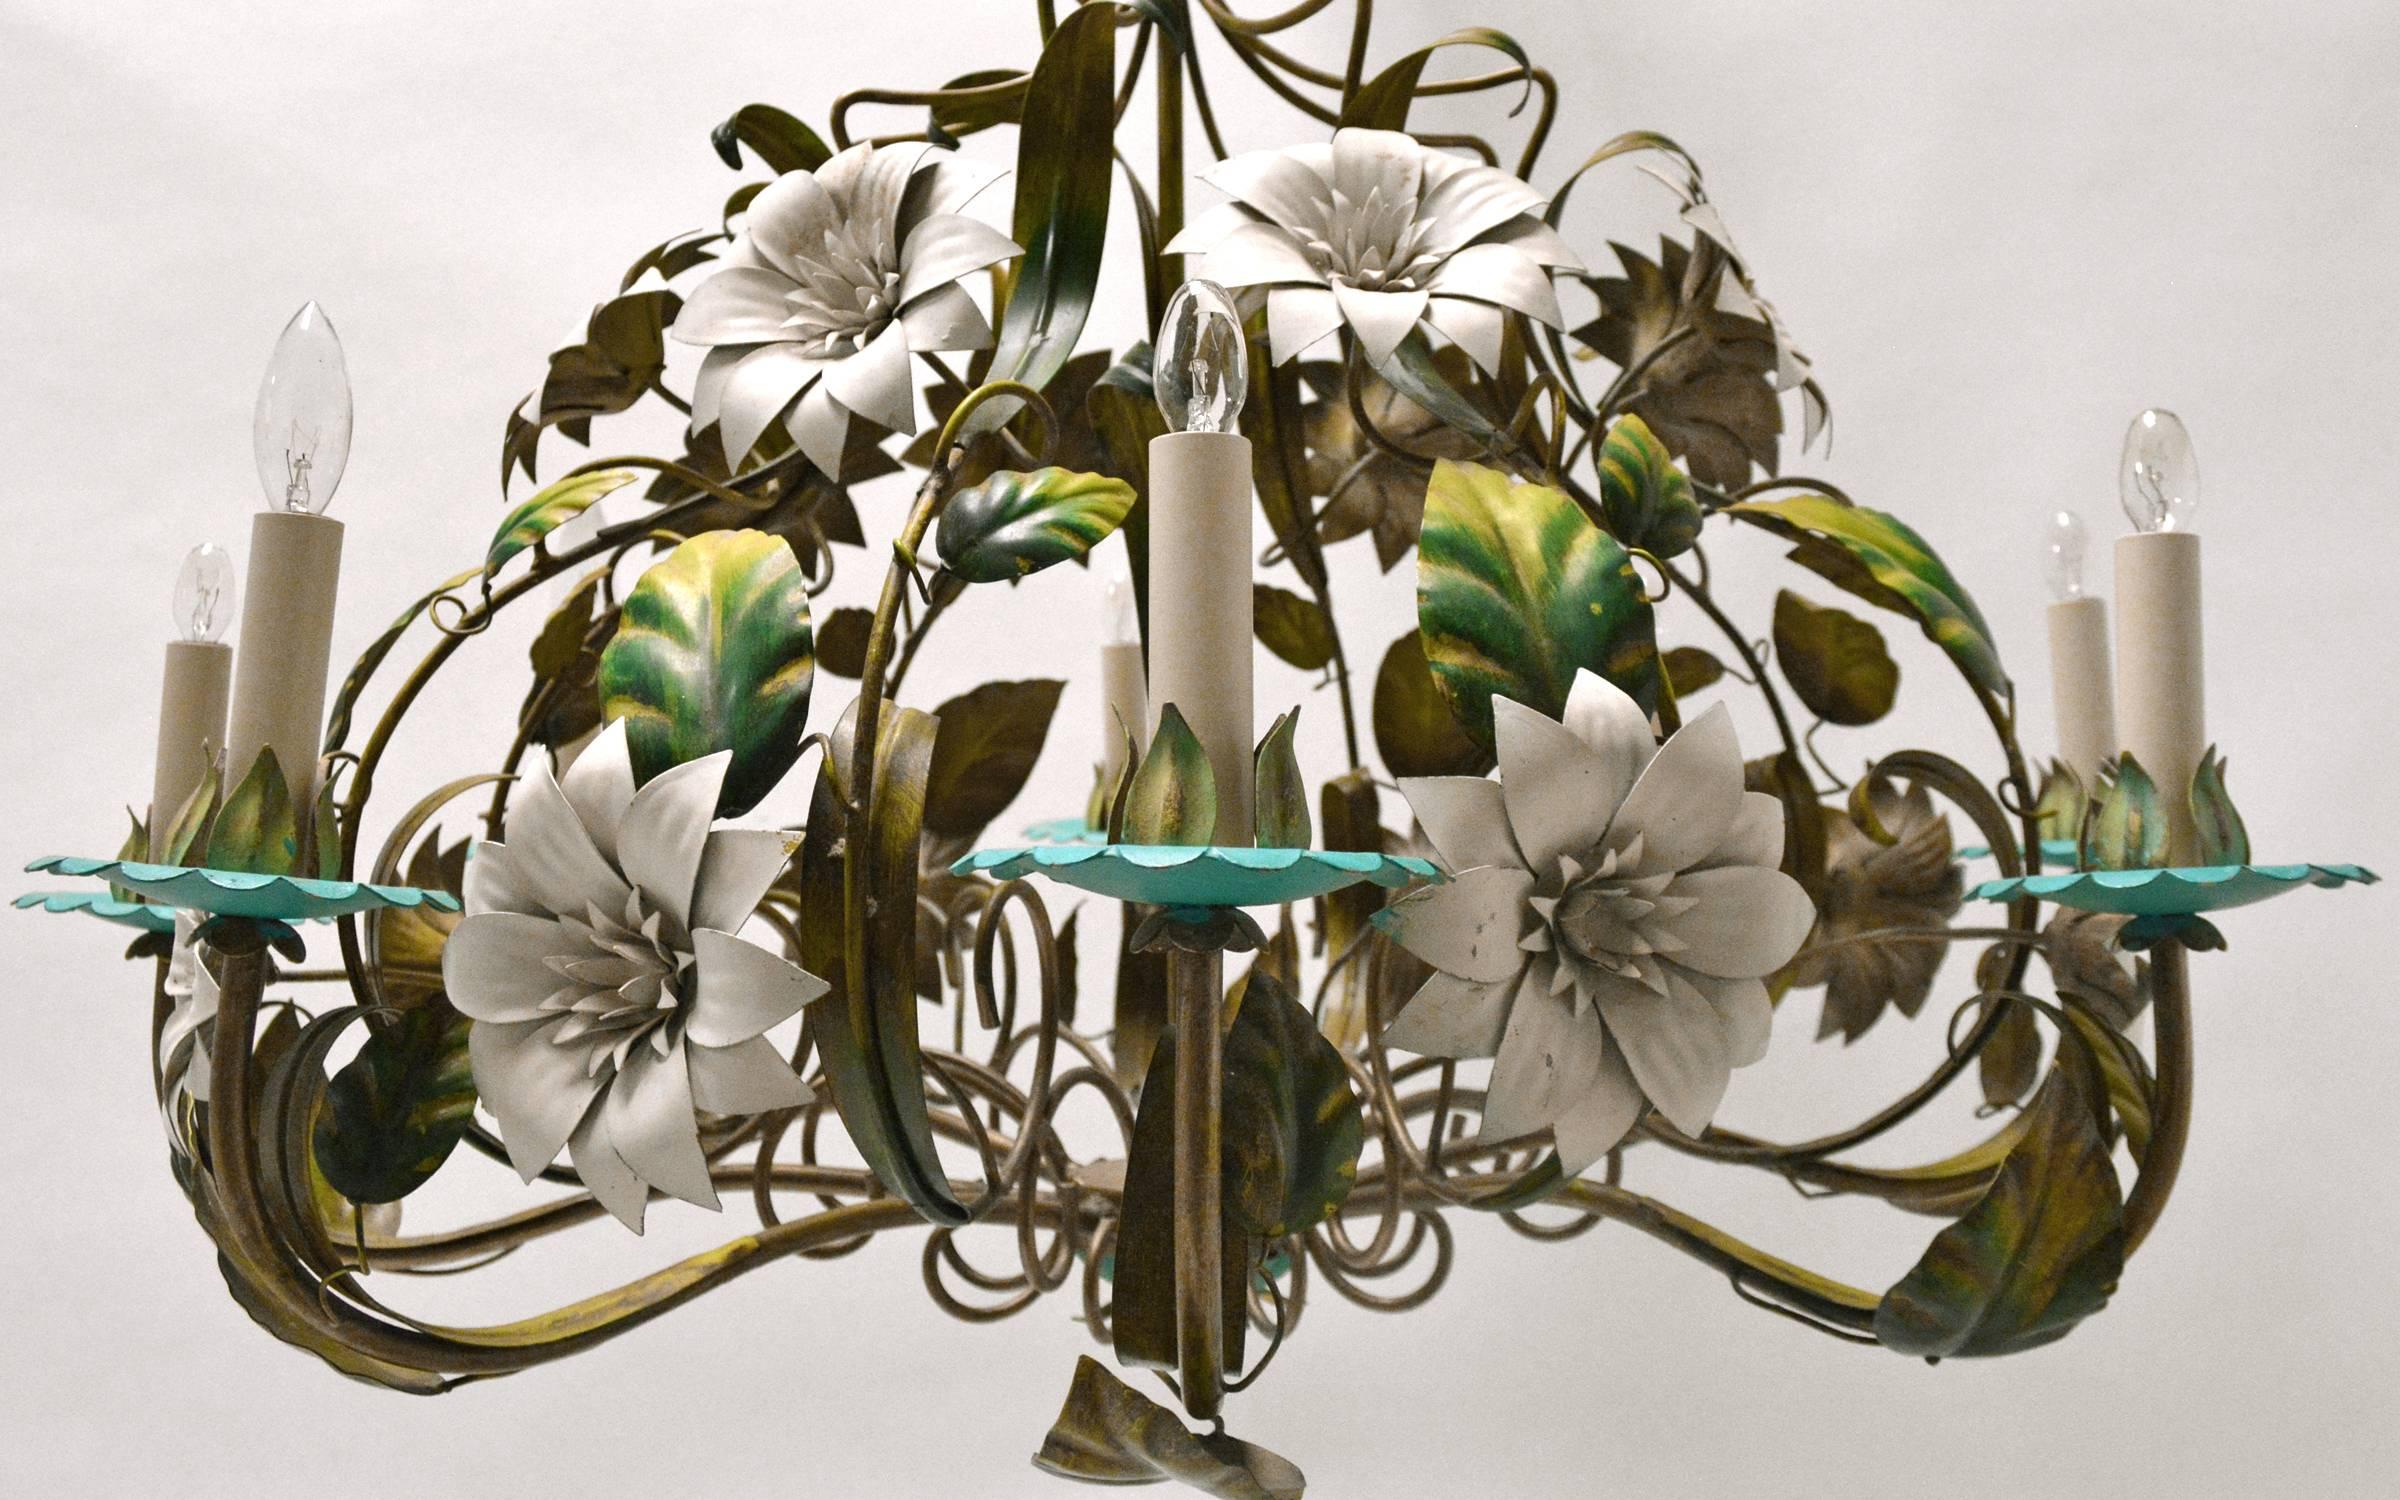 A large vintage tole eight-light chandelier with flower and leaf accents. Original paint finish in vibrant greens, turquoise and white.